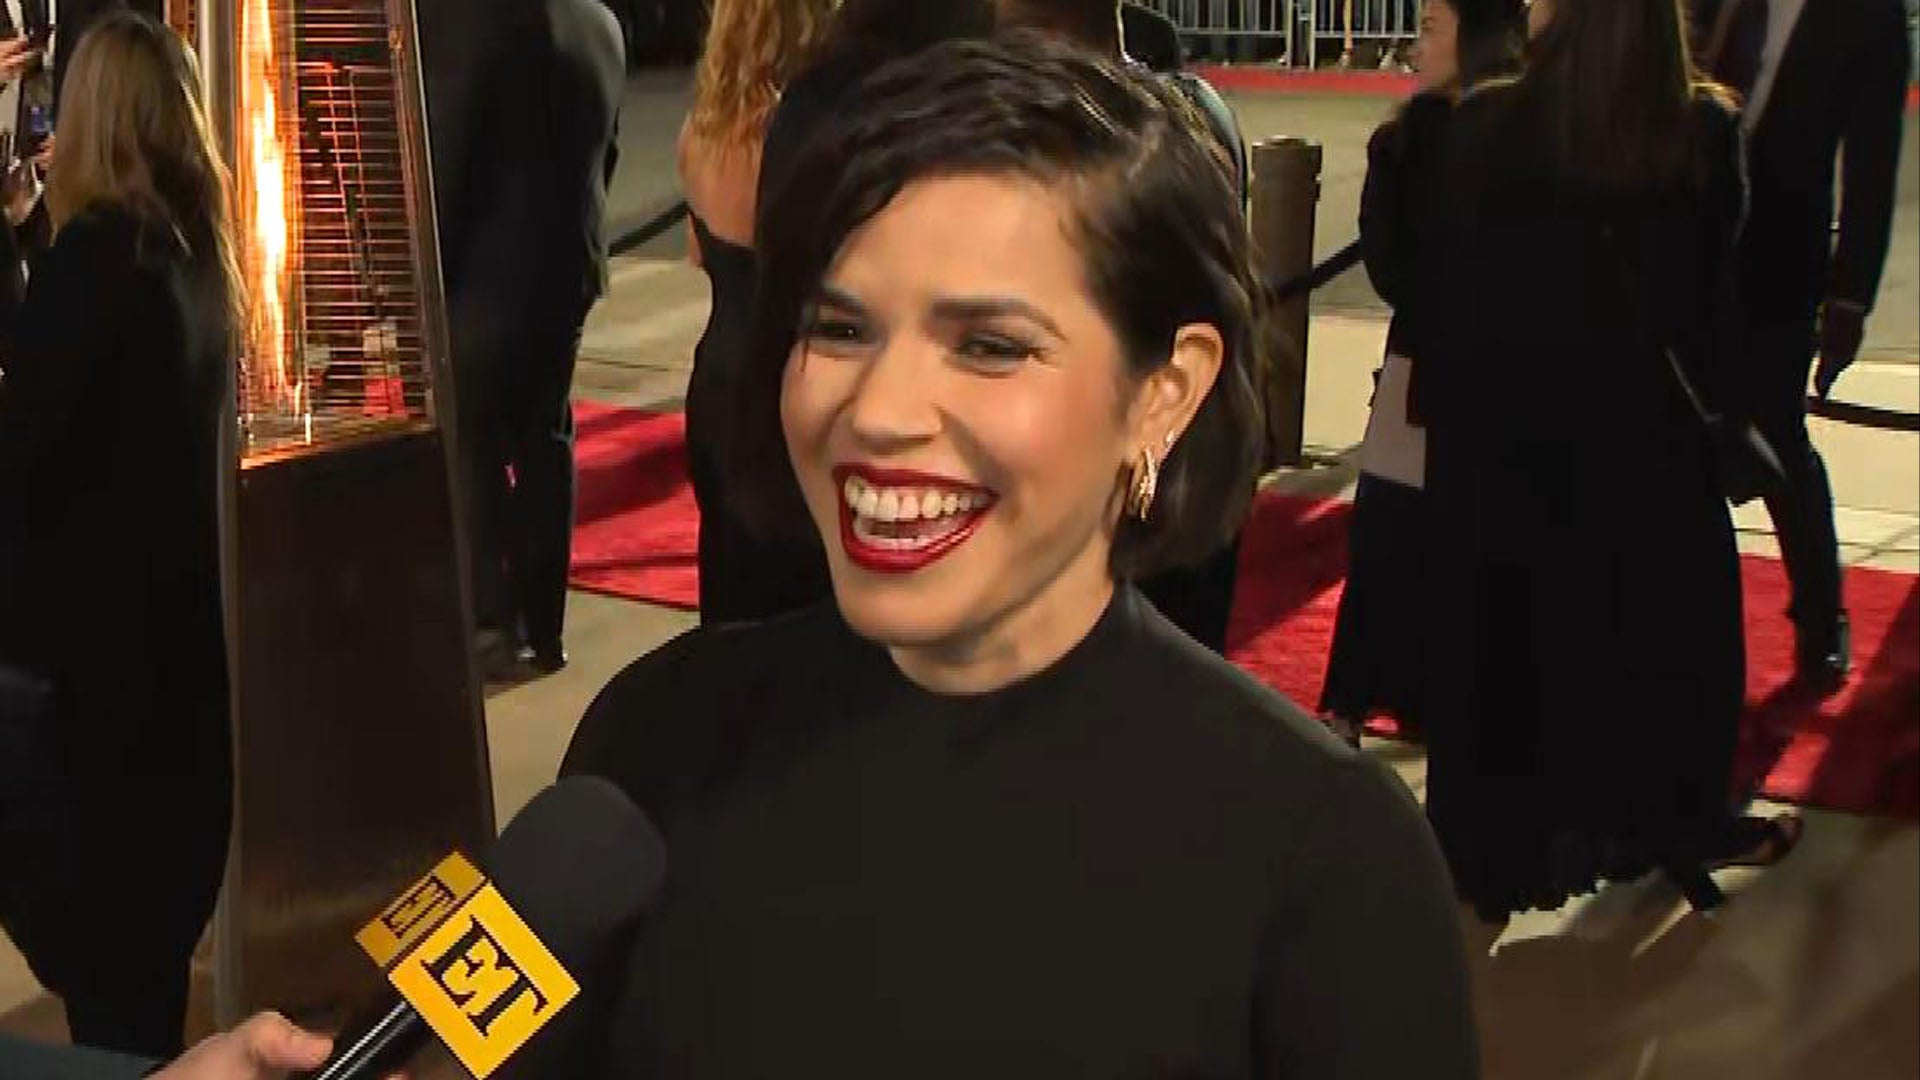 America Ferrera Dishes on 'Real Life' 'Sisterhood' With 'Traveling Pants' Co-Stars (Exclusive)